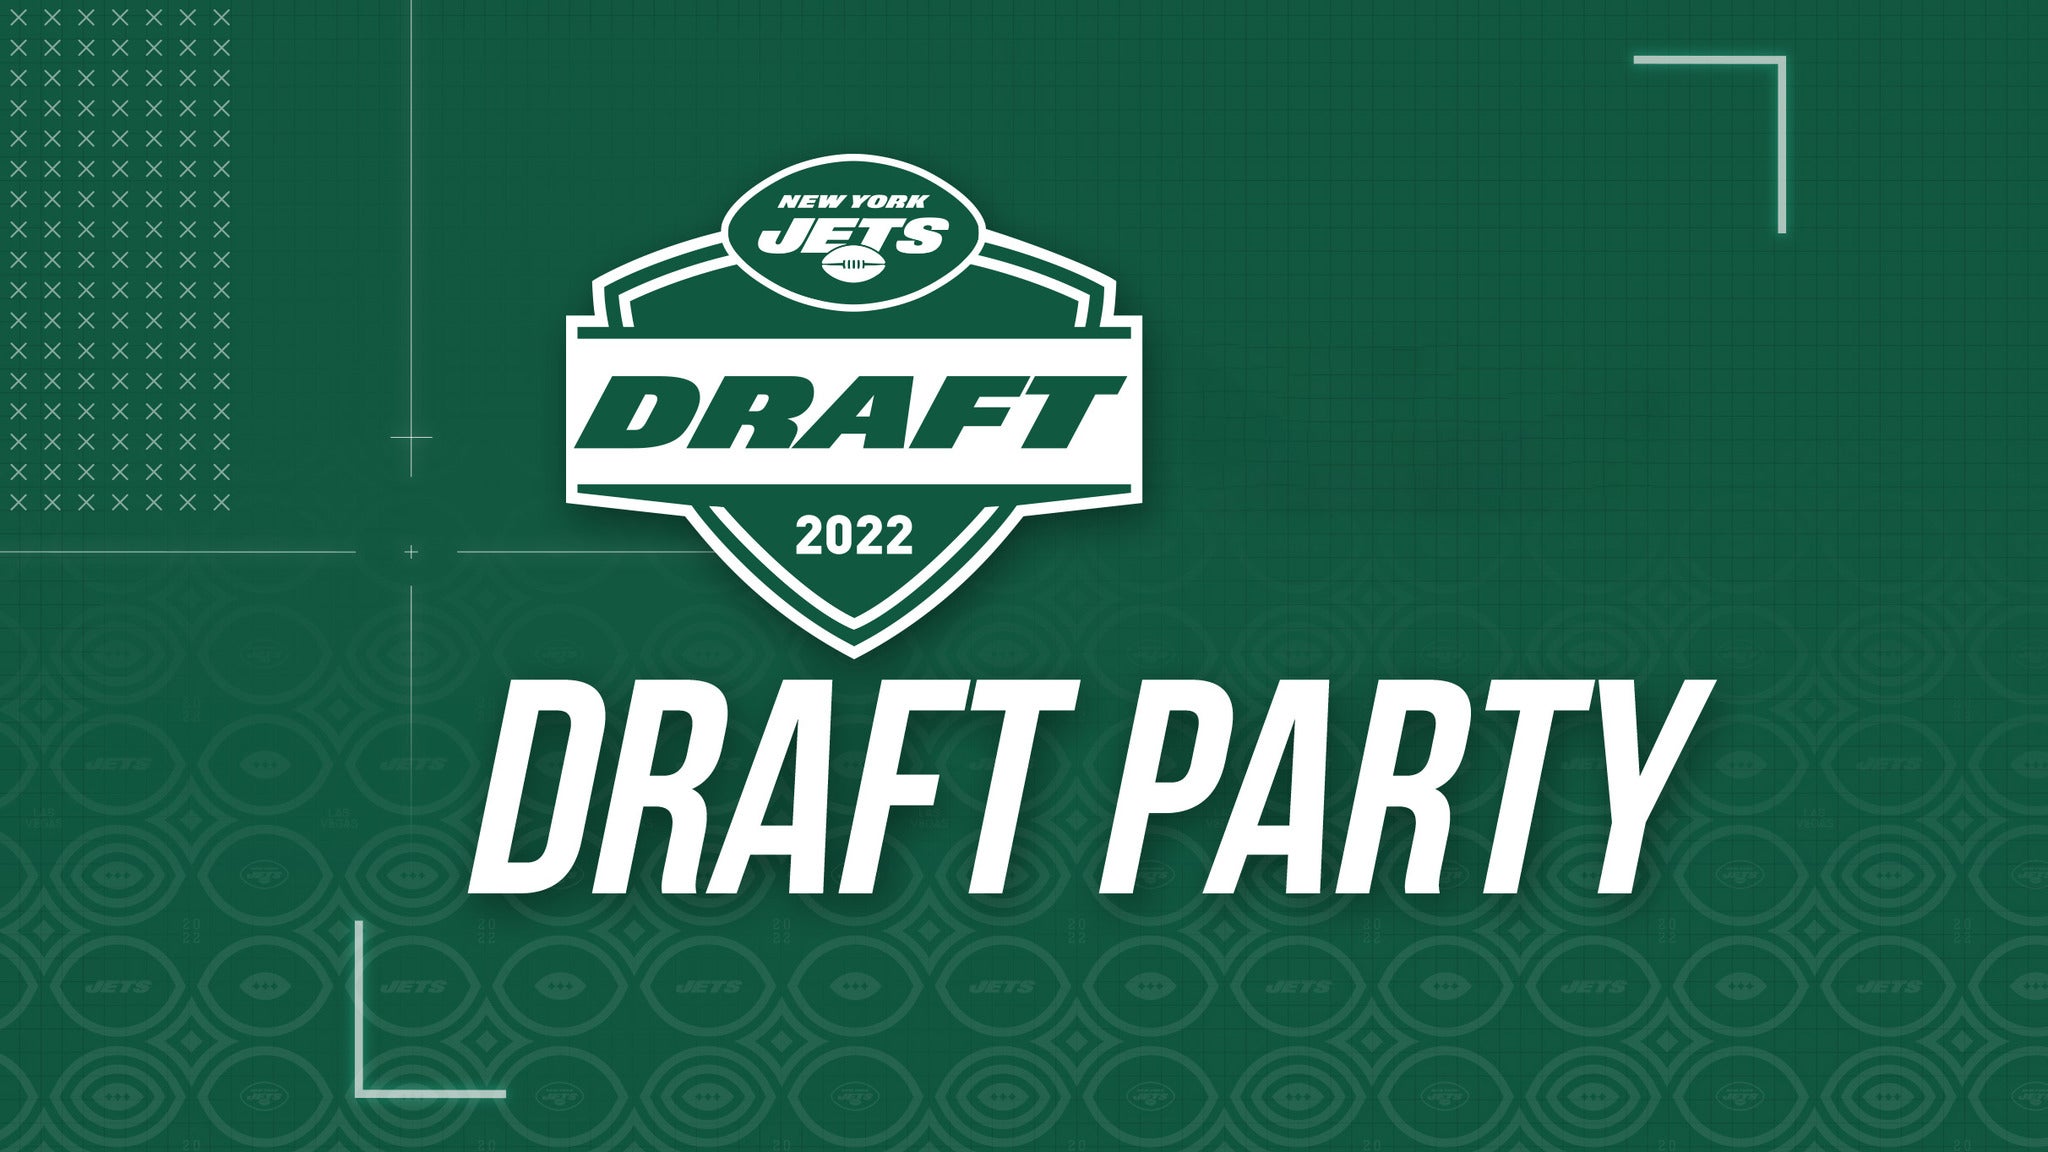 New York Jets Draft Party Tickets Single Game Tickets & Schedule